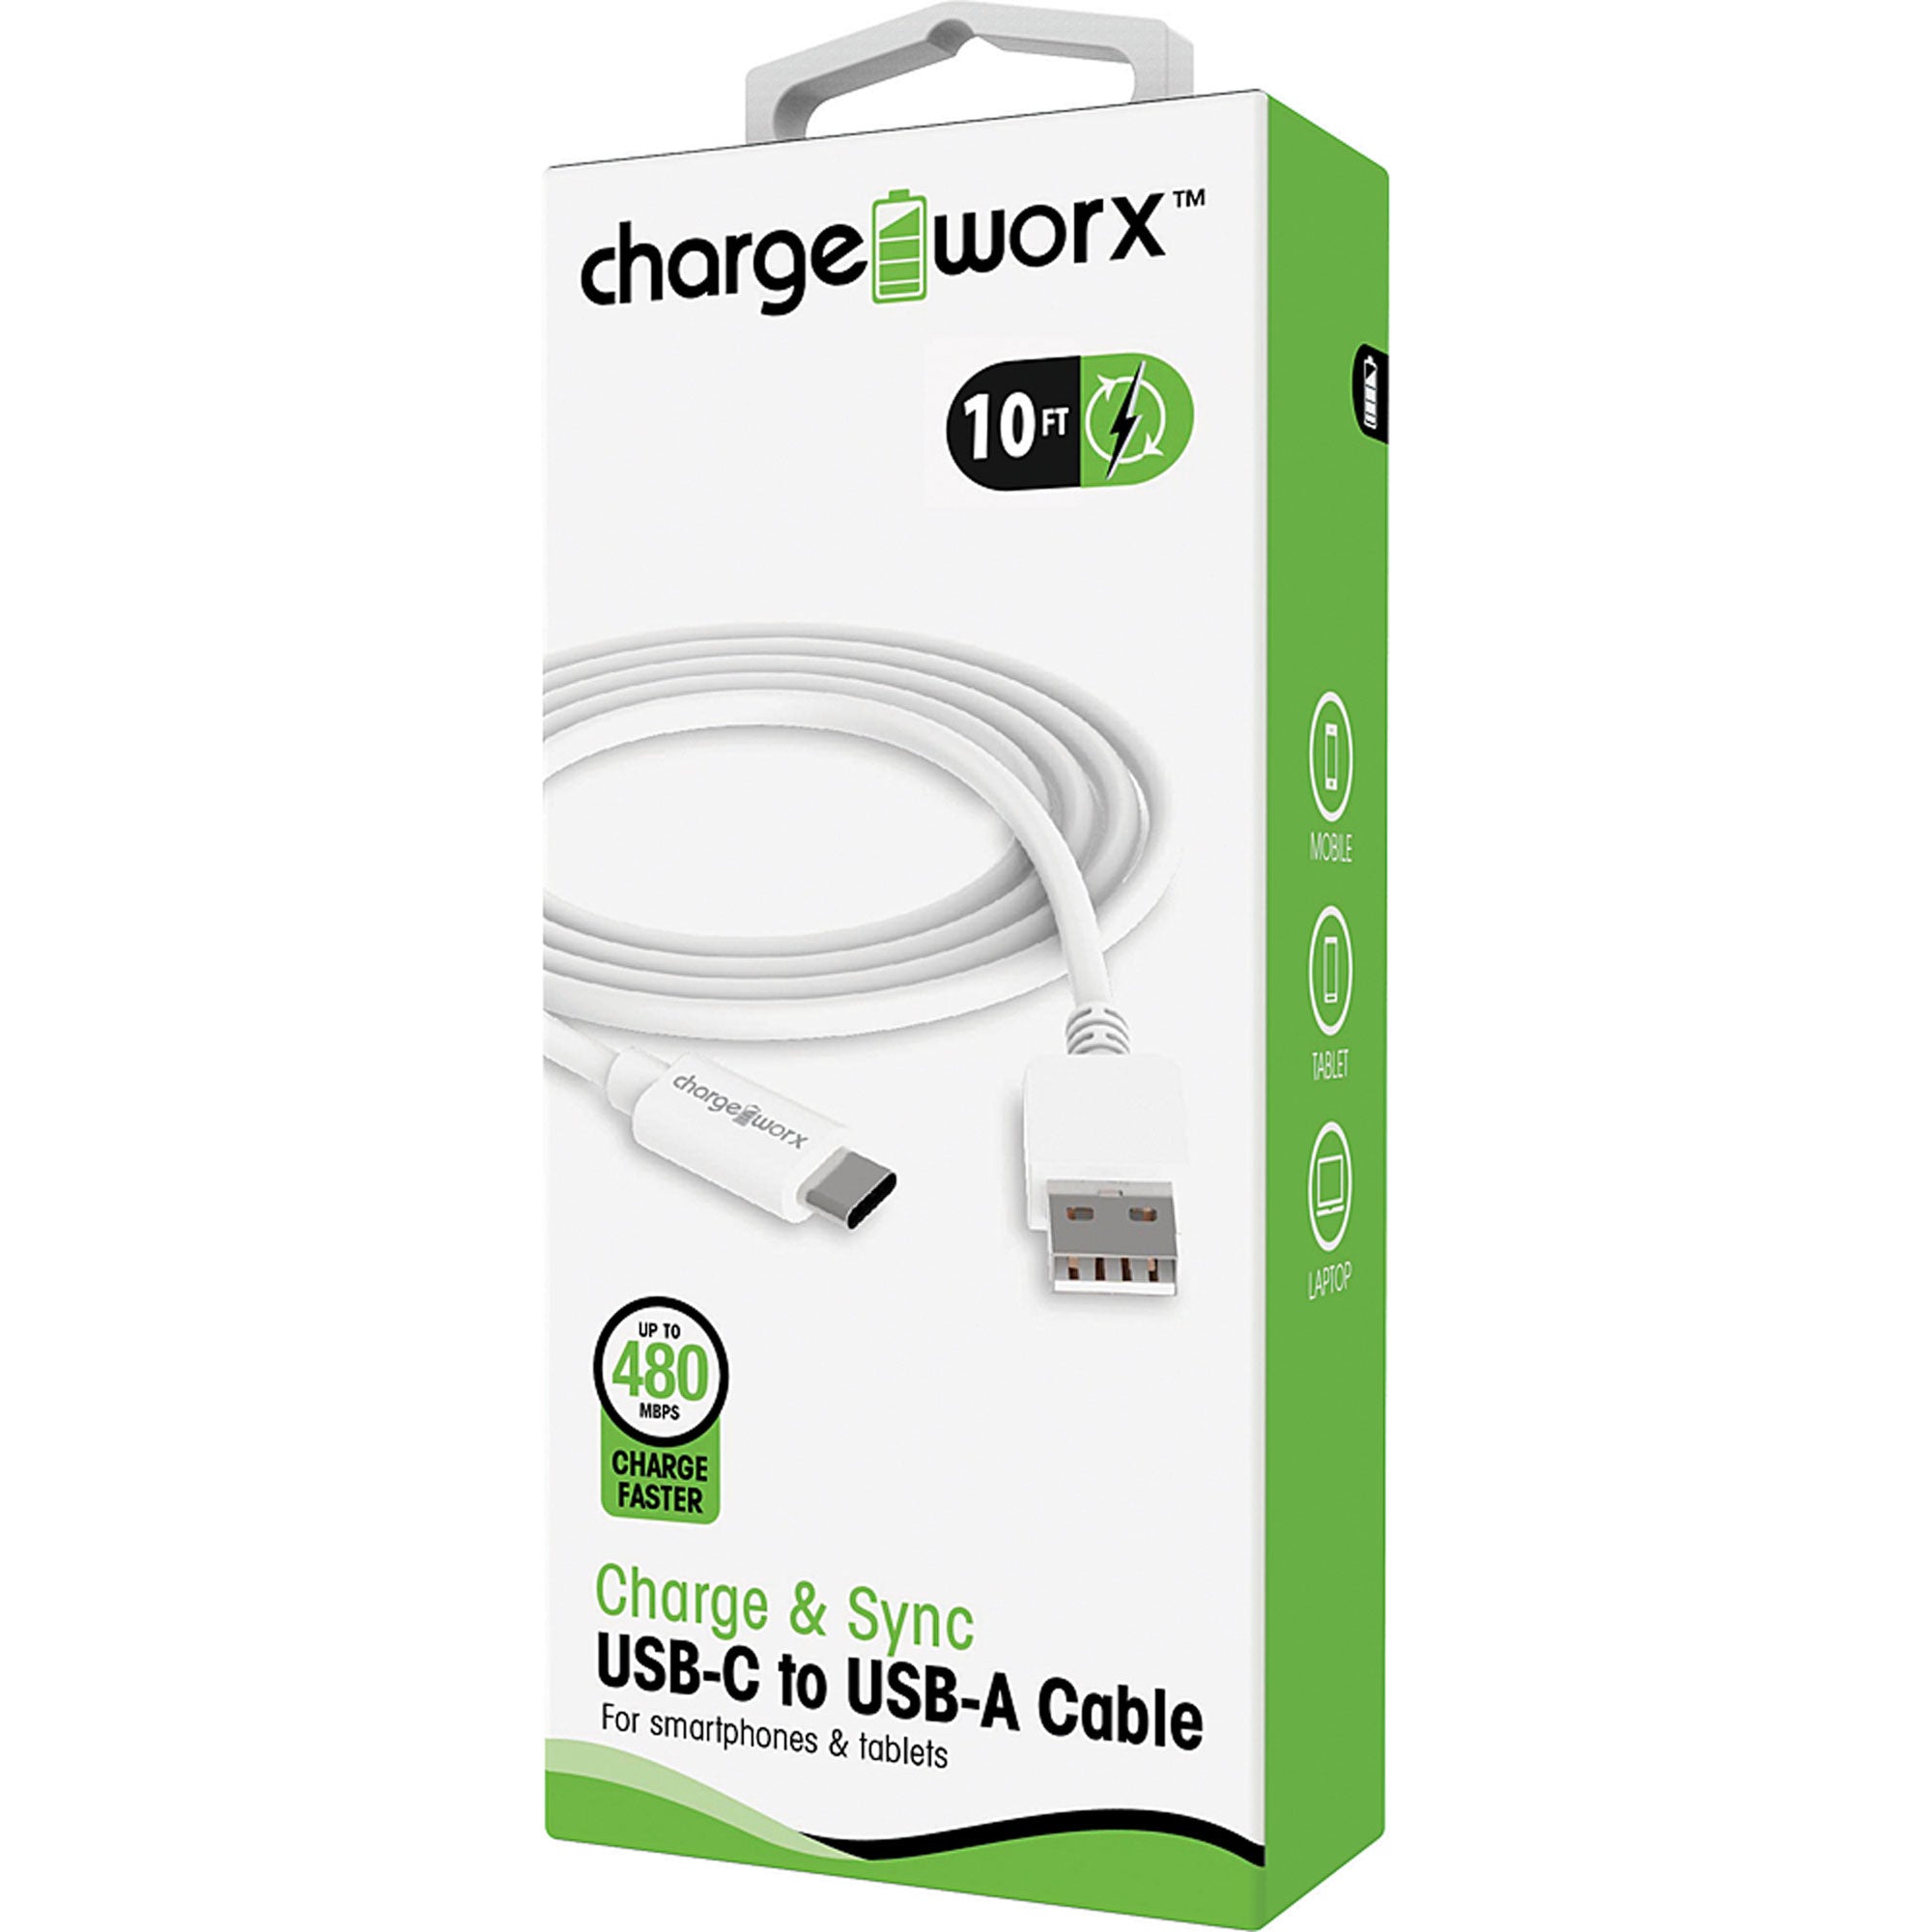 Chargeworx 10ft USB-C to USB-A Sync & Charge Cable